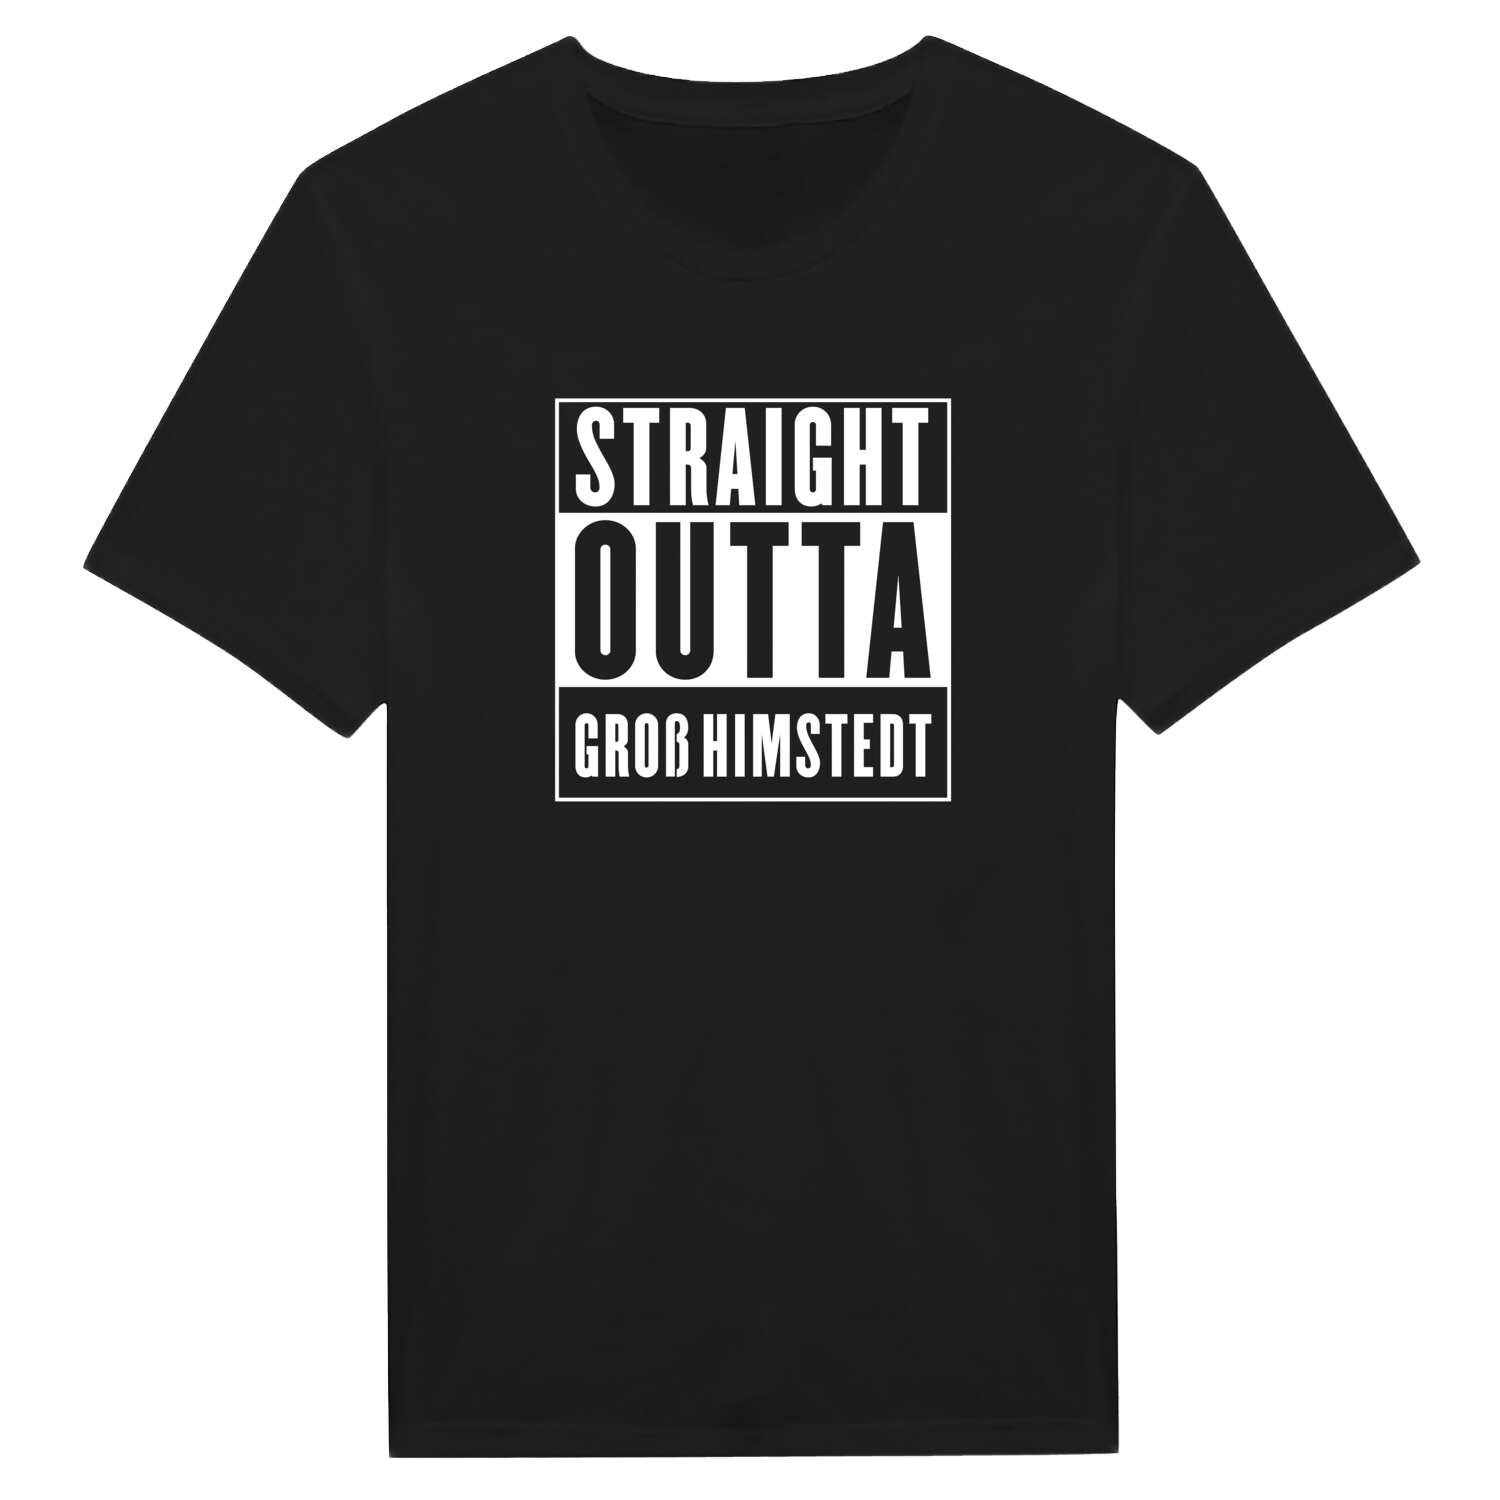 Groß Himstedt T-Shirt »Straight Outta«